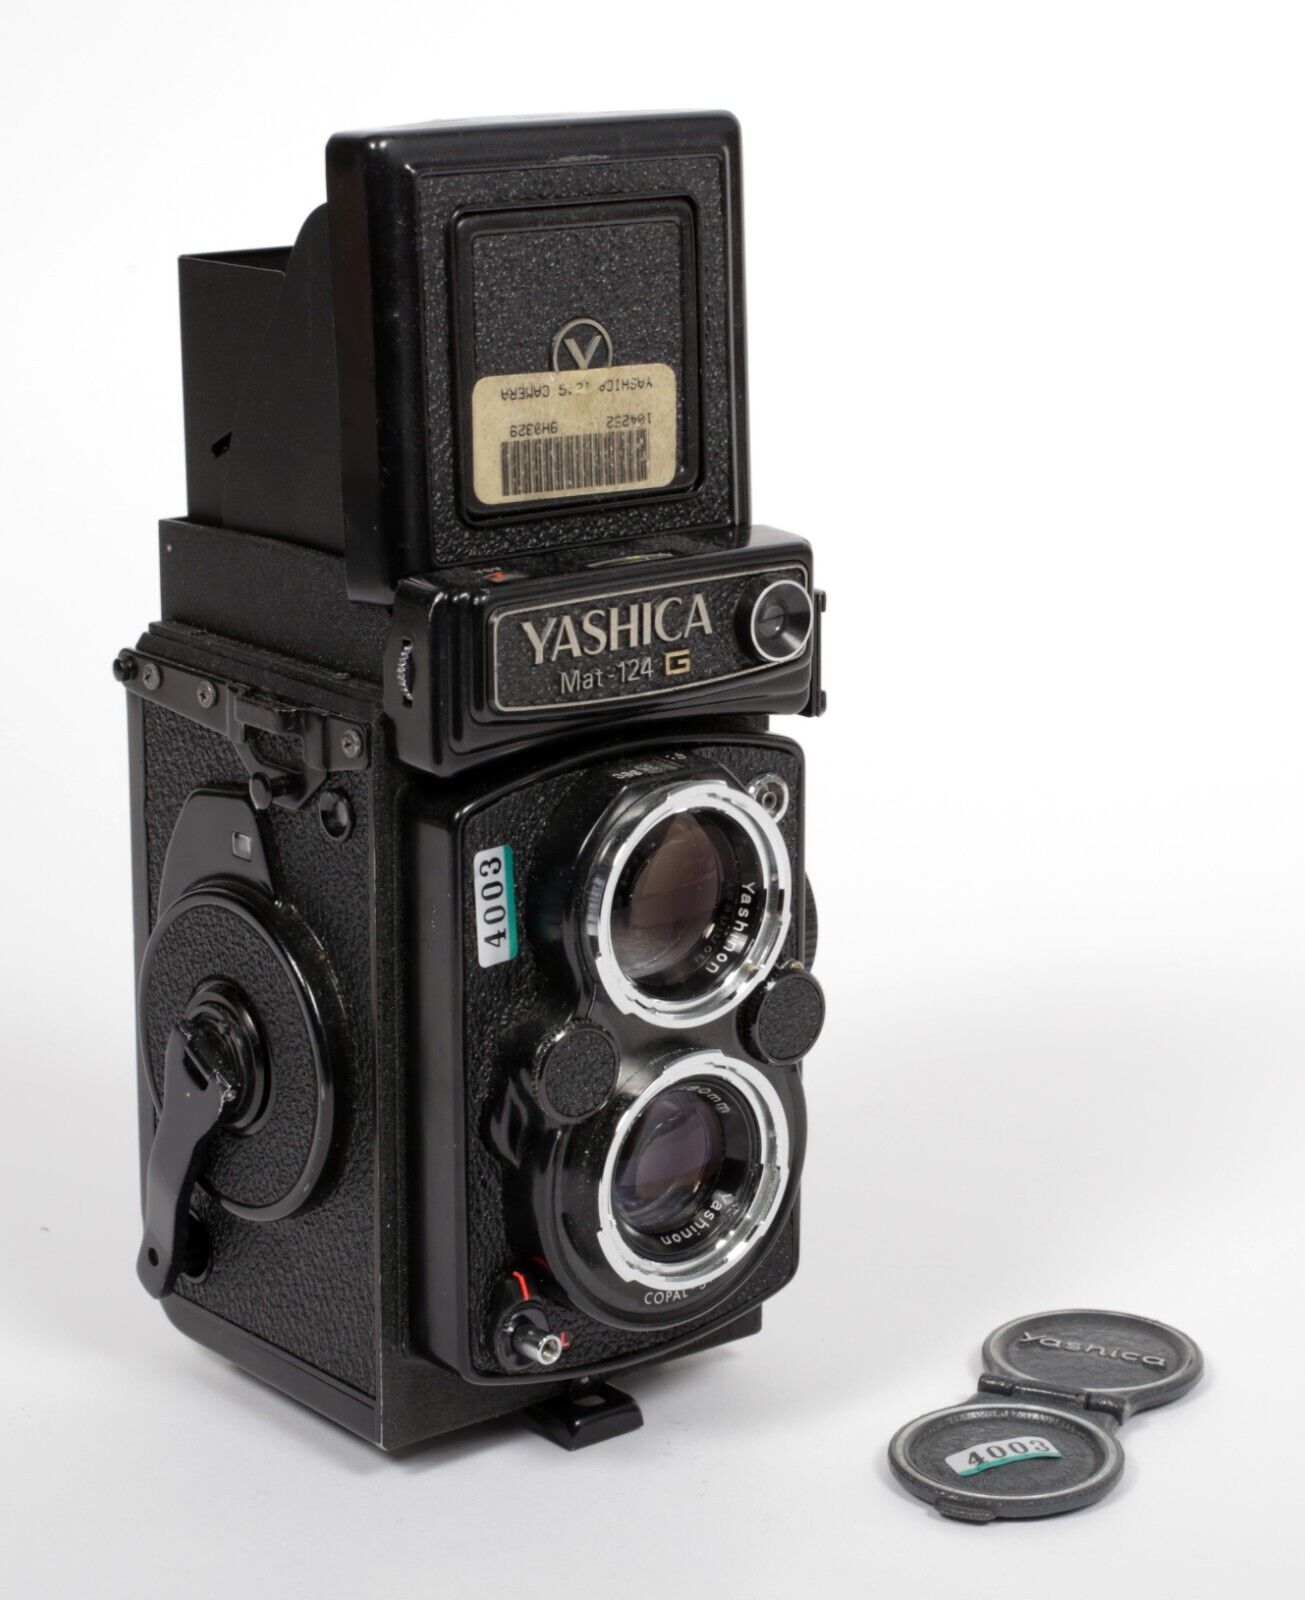 Yashica Mat 124G 6X6 TLR film camera with 80mm F3.5 lens with cap #4003 |  CatLABS